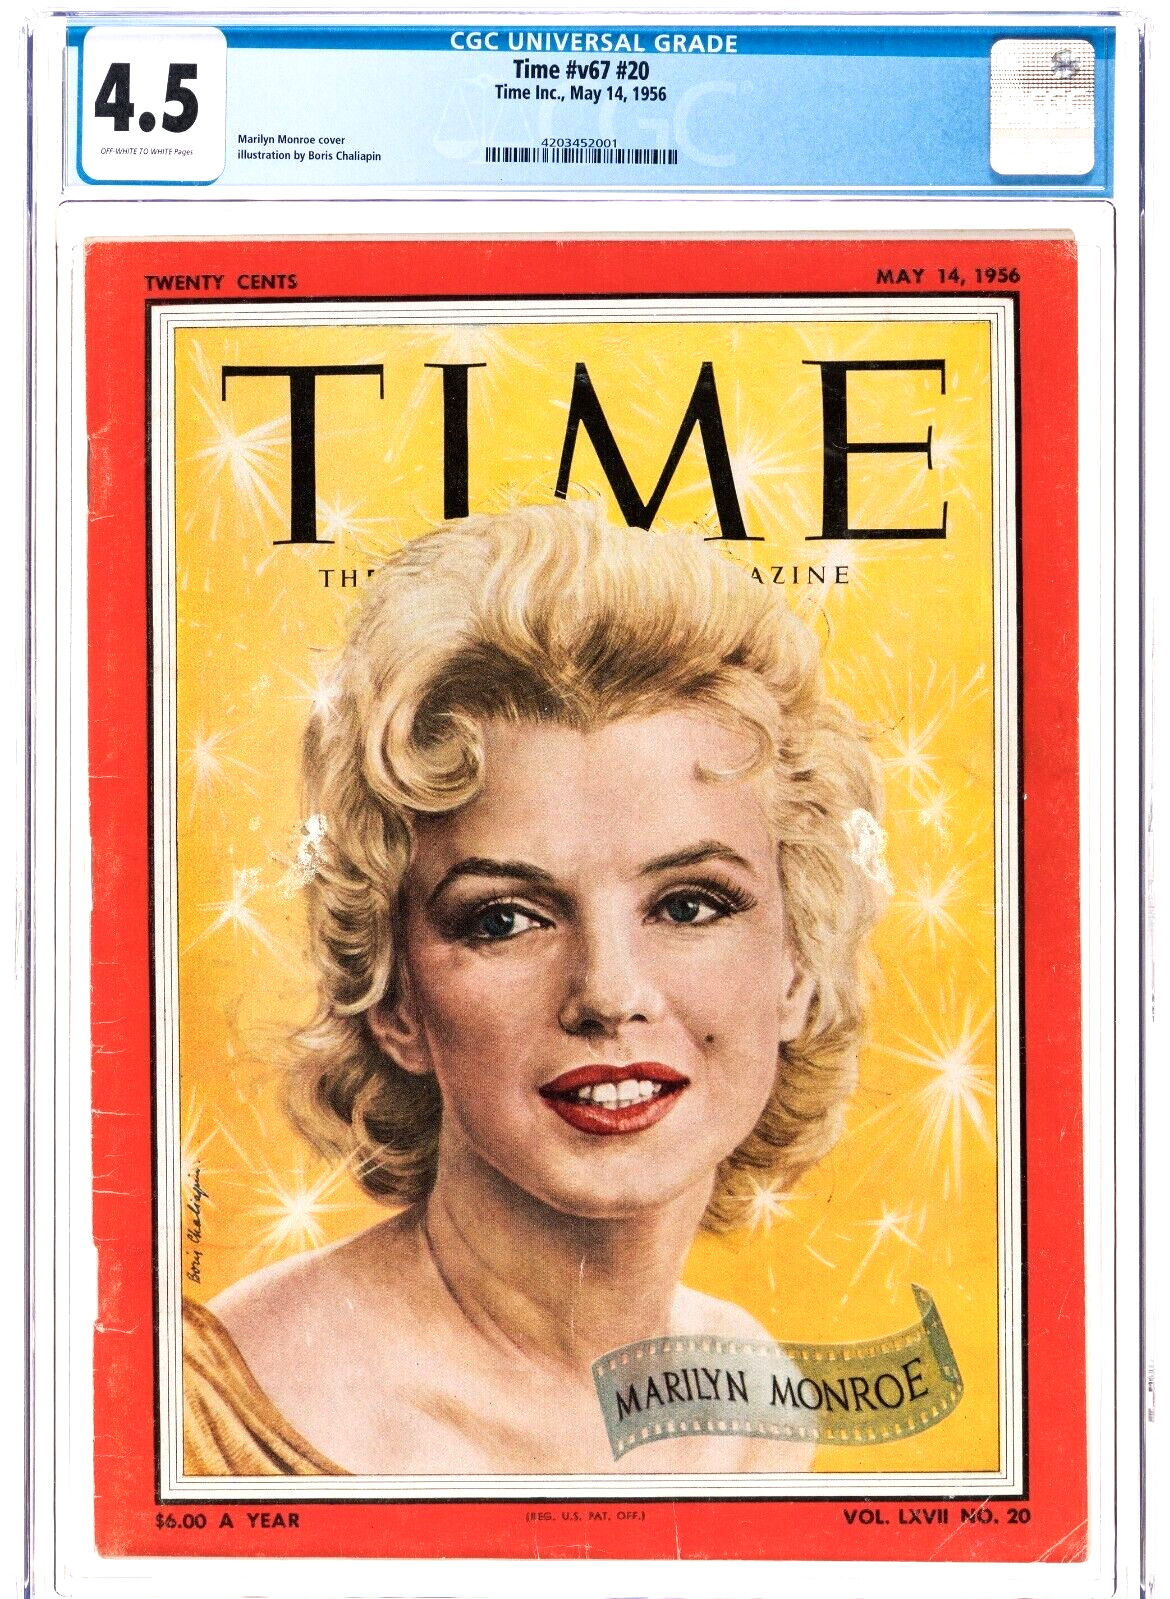 CGC 4.5 NEWSSTAND MARILYN MONROE 1ST TIME MAGAZINE (v67 #20/MAY 14, 1956)